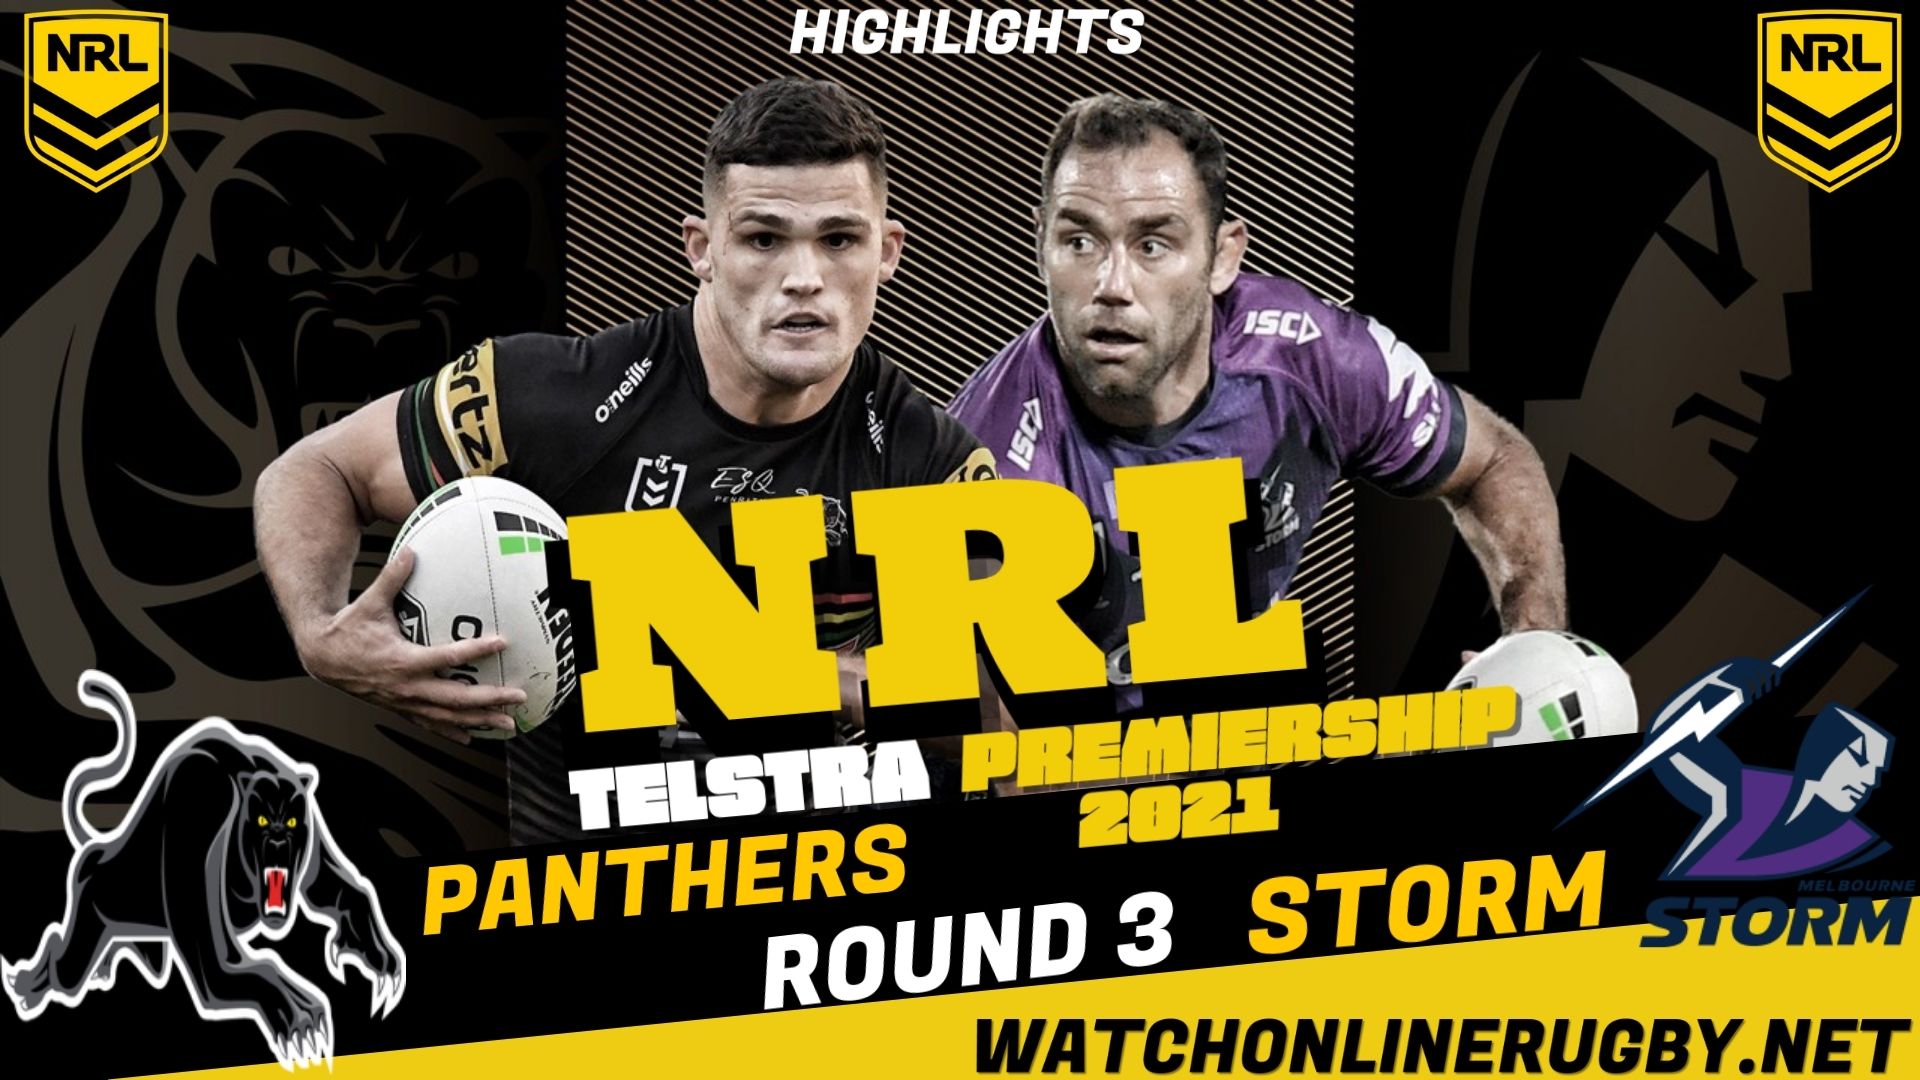 Panthers Vs Storm Highlights RD 3 NRL Rugby